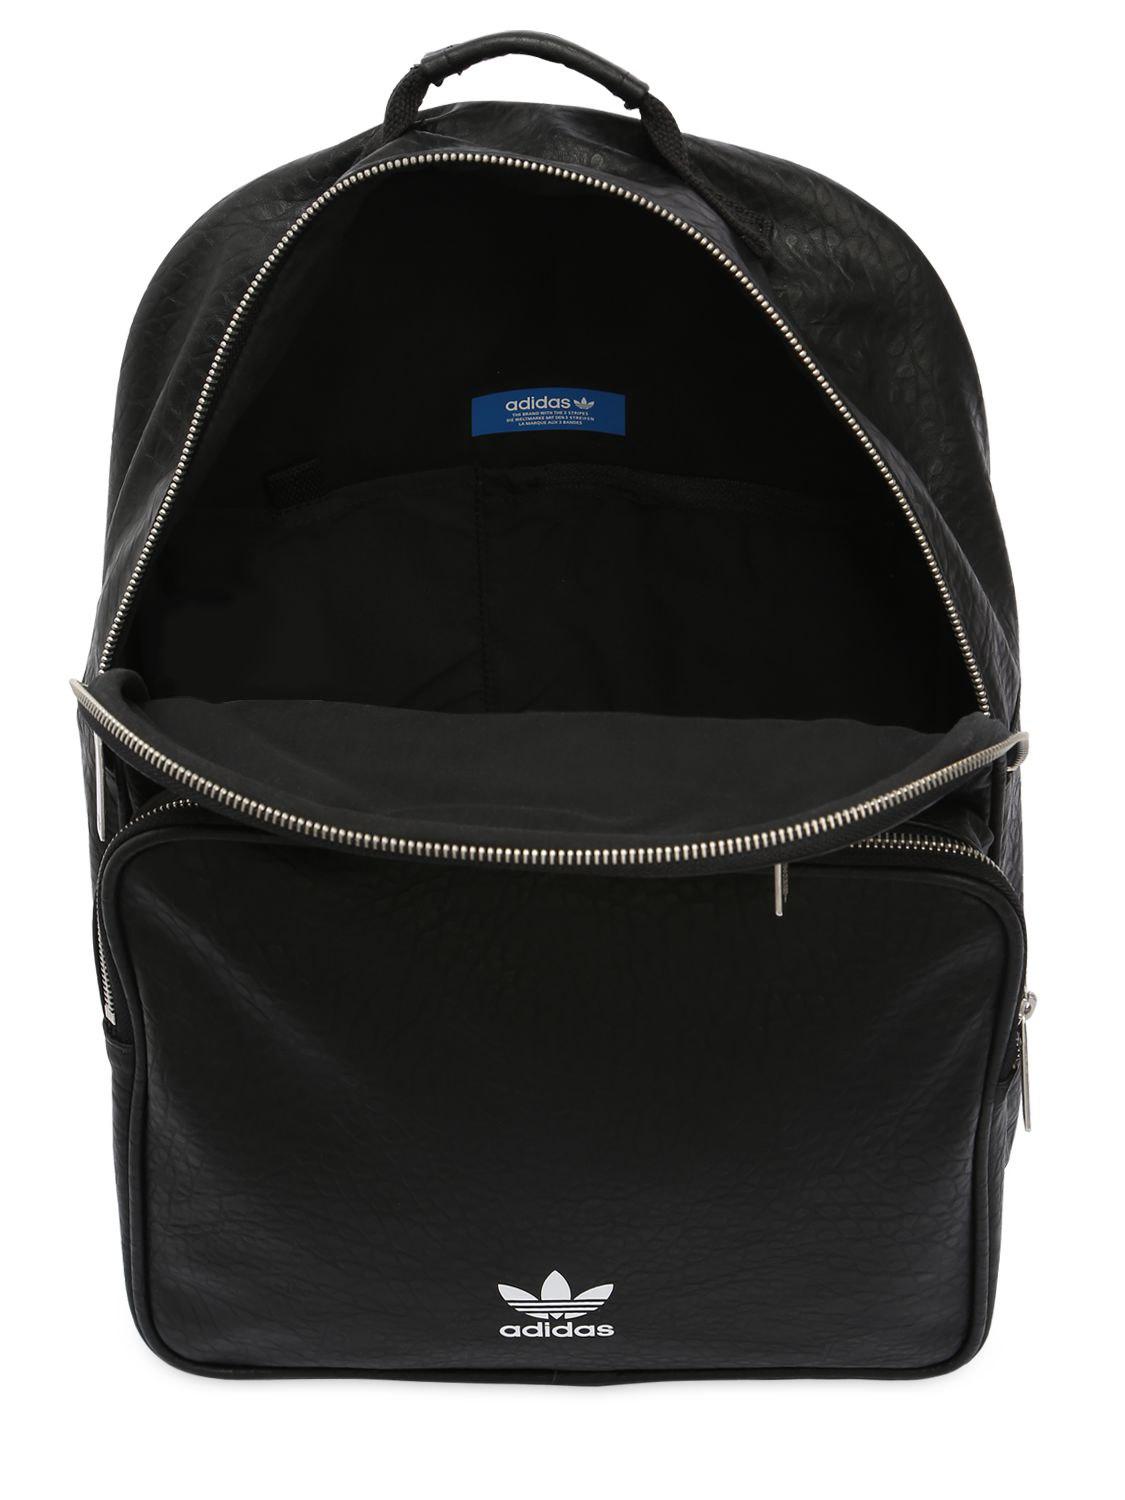 adidas Originals Ac F Bp Classic Faux Leather Backpack in Black - Lyst